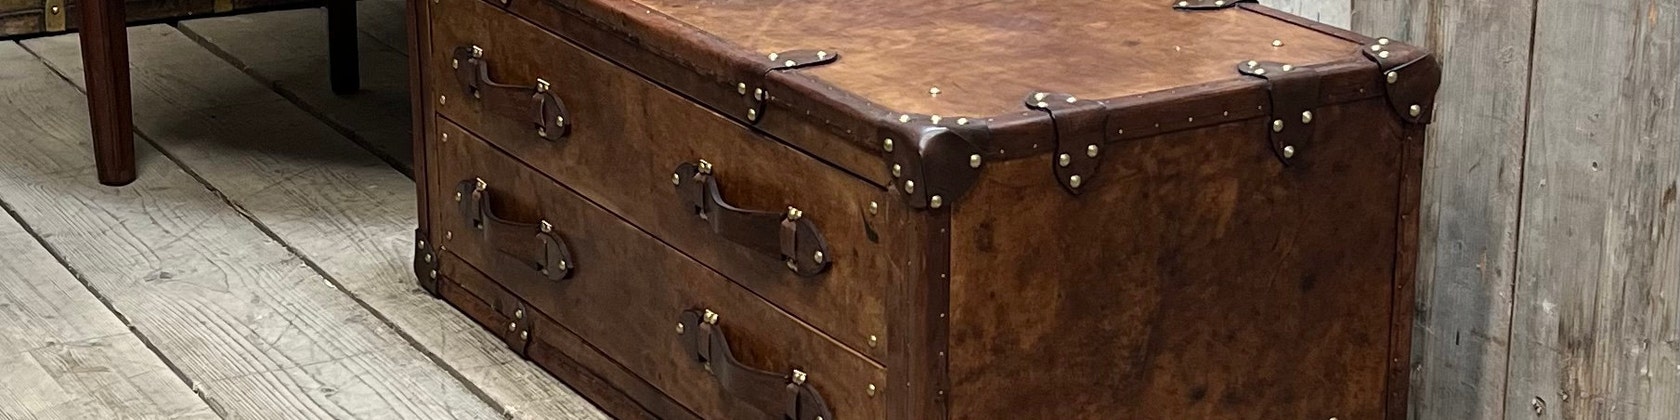 Furniture Inspired by Old Steamer Trunks